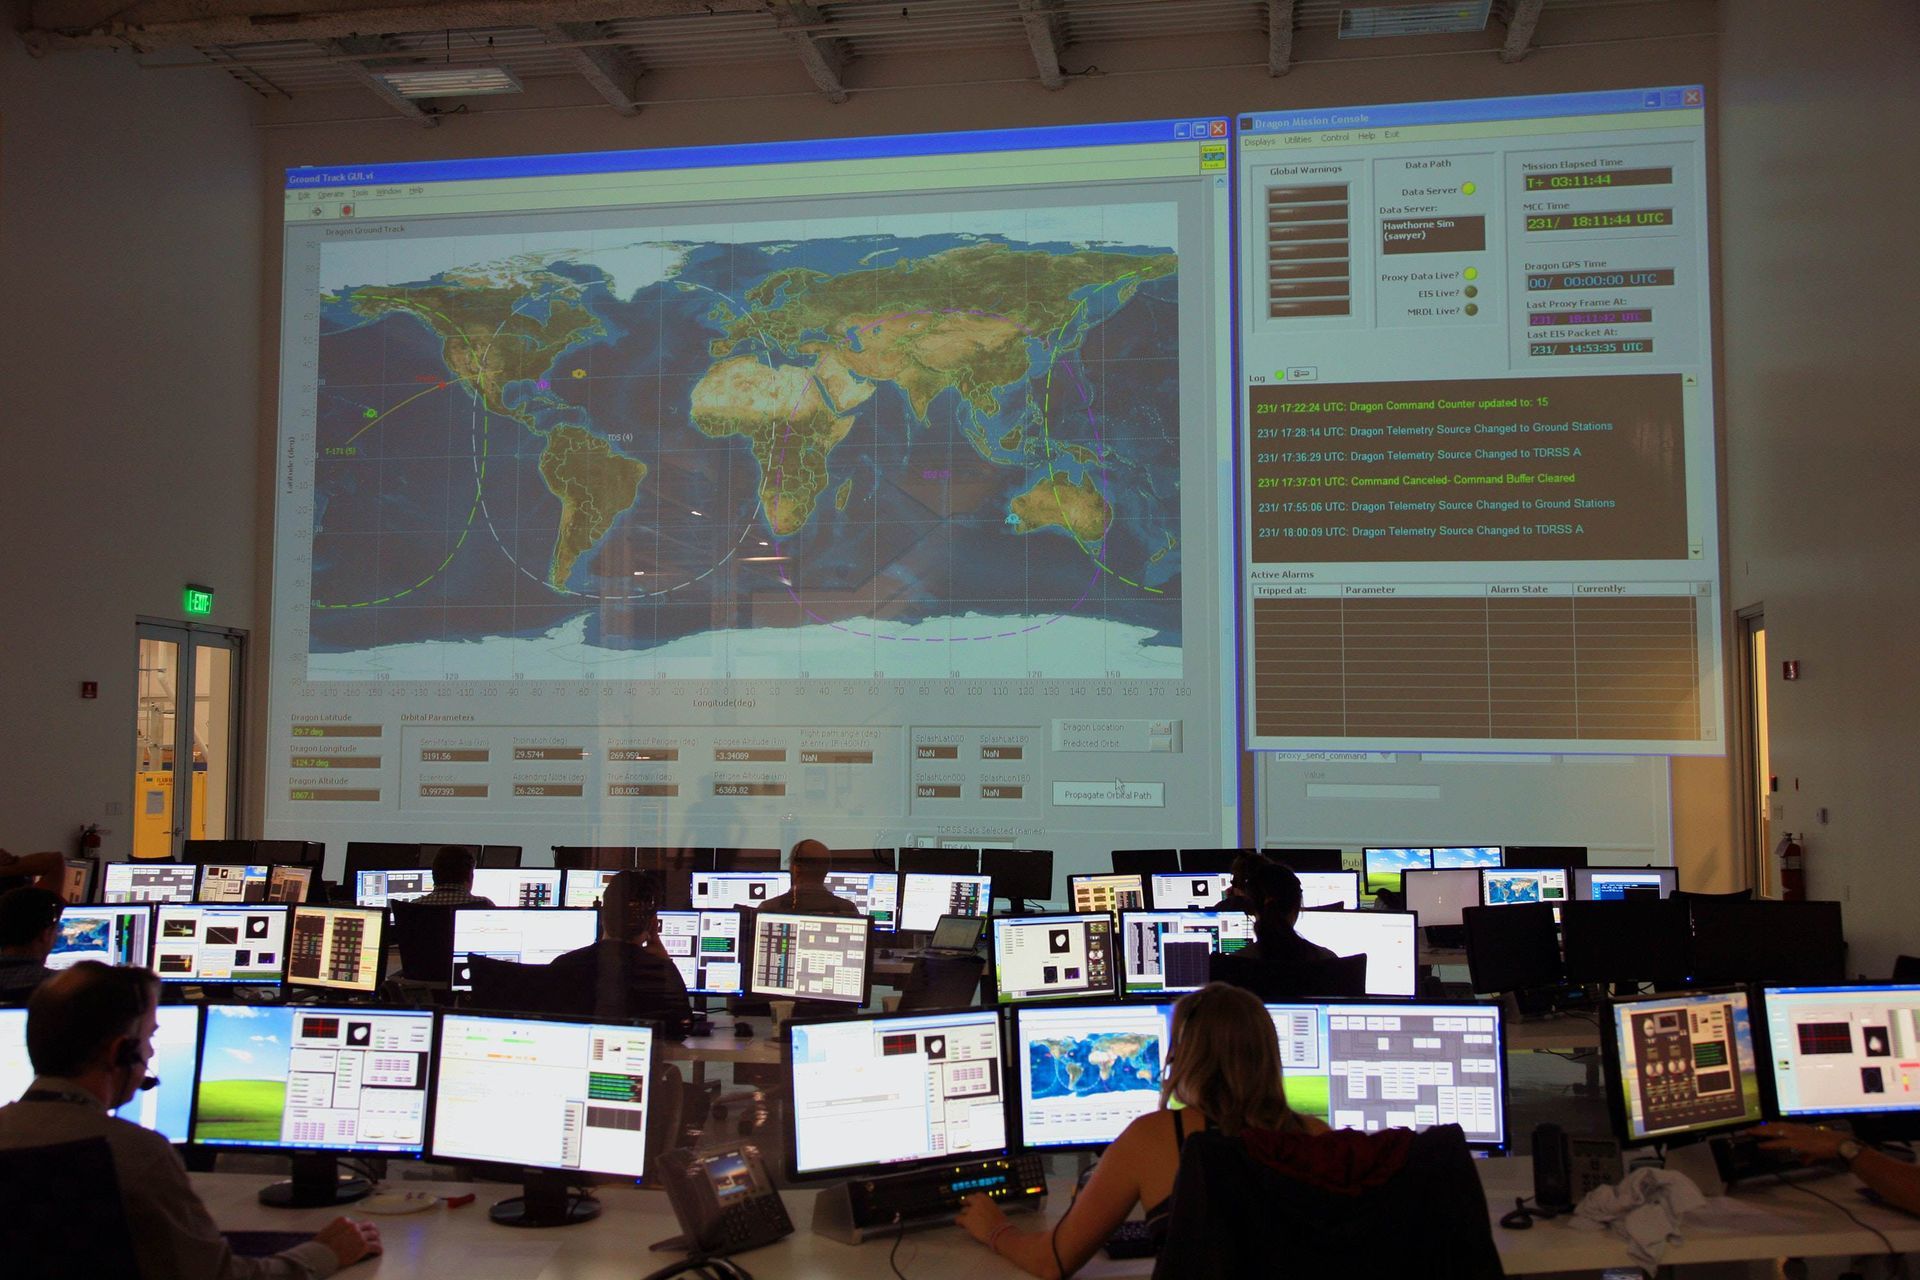 SpaceX command center